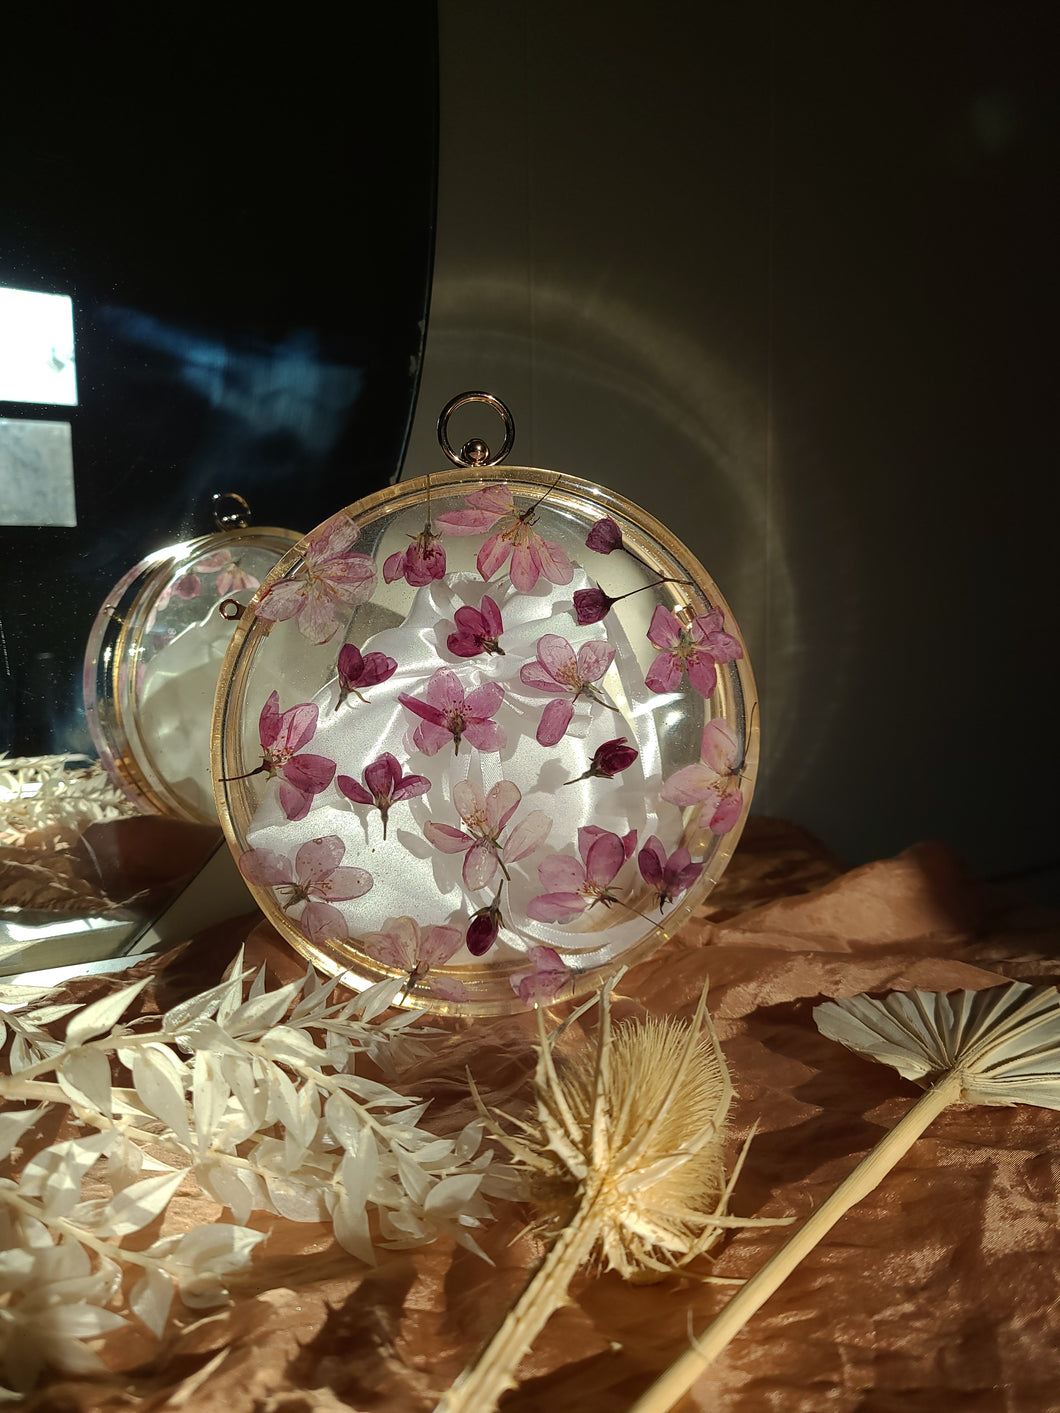 Round Blossom Clutch, resin clutch, removable golden crossbody chain, 7 inches in diameter